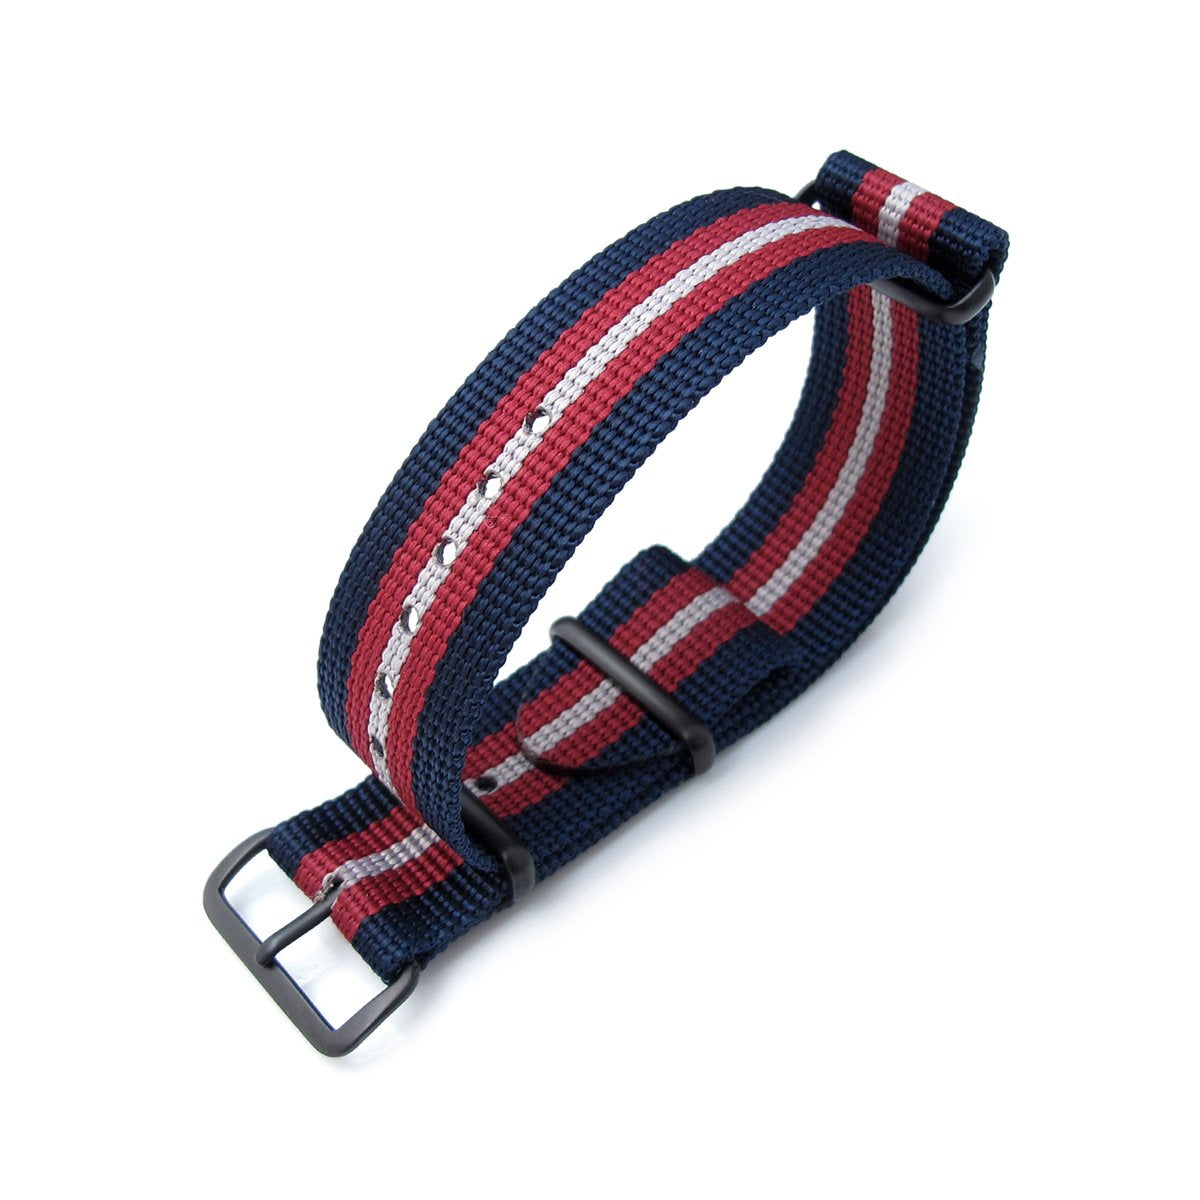 MiLTAT 20mm 21mm or 22mm G10 NATO Bullet Tail Watch Strap Ballistic Nylon PVD Blue Red & Grey Stripes Strapcode Watch Bands